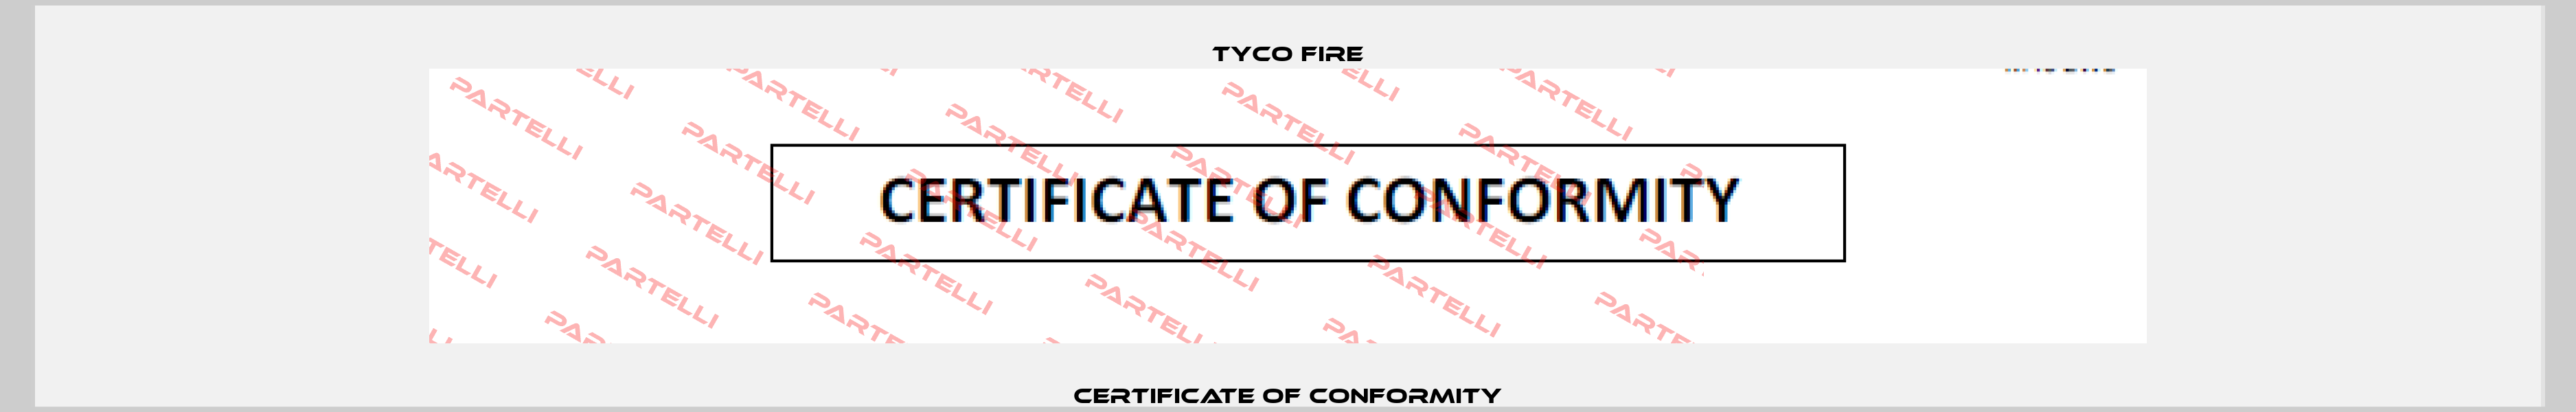 Certificate of Conformity Tyco Fire